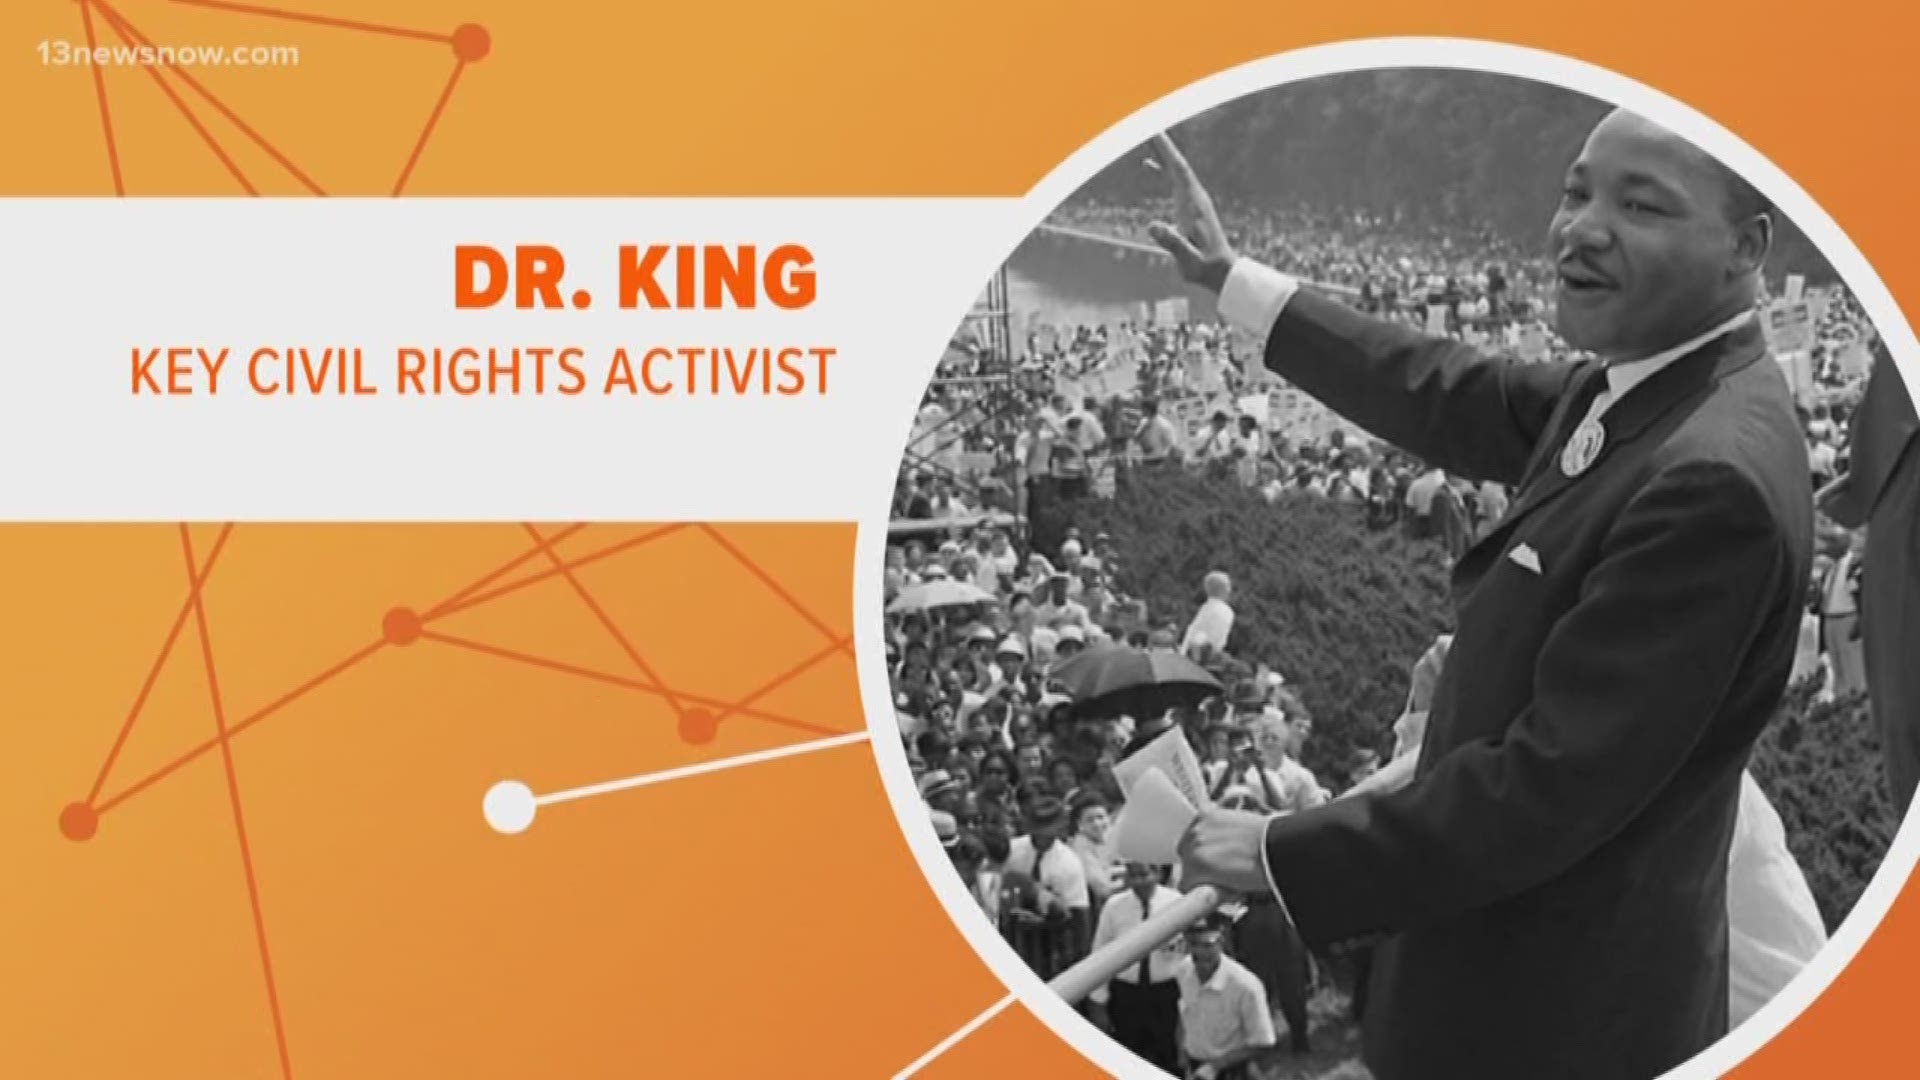 As we celebrate Dr. Martin Luther King Jr. and all the important work he did for this country, let's connect the dots on his journey promoting equal rights for all.